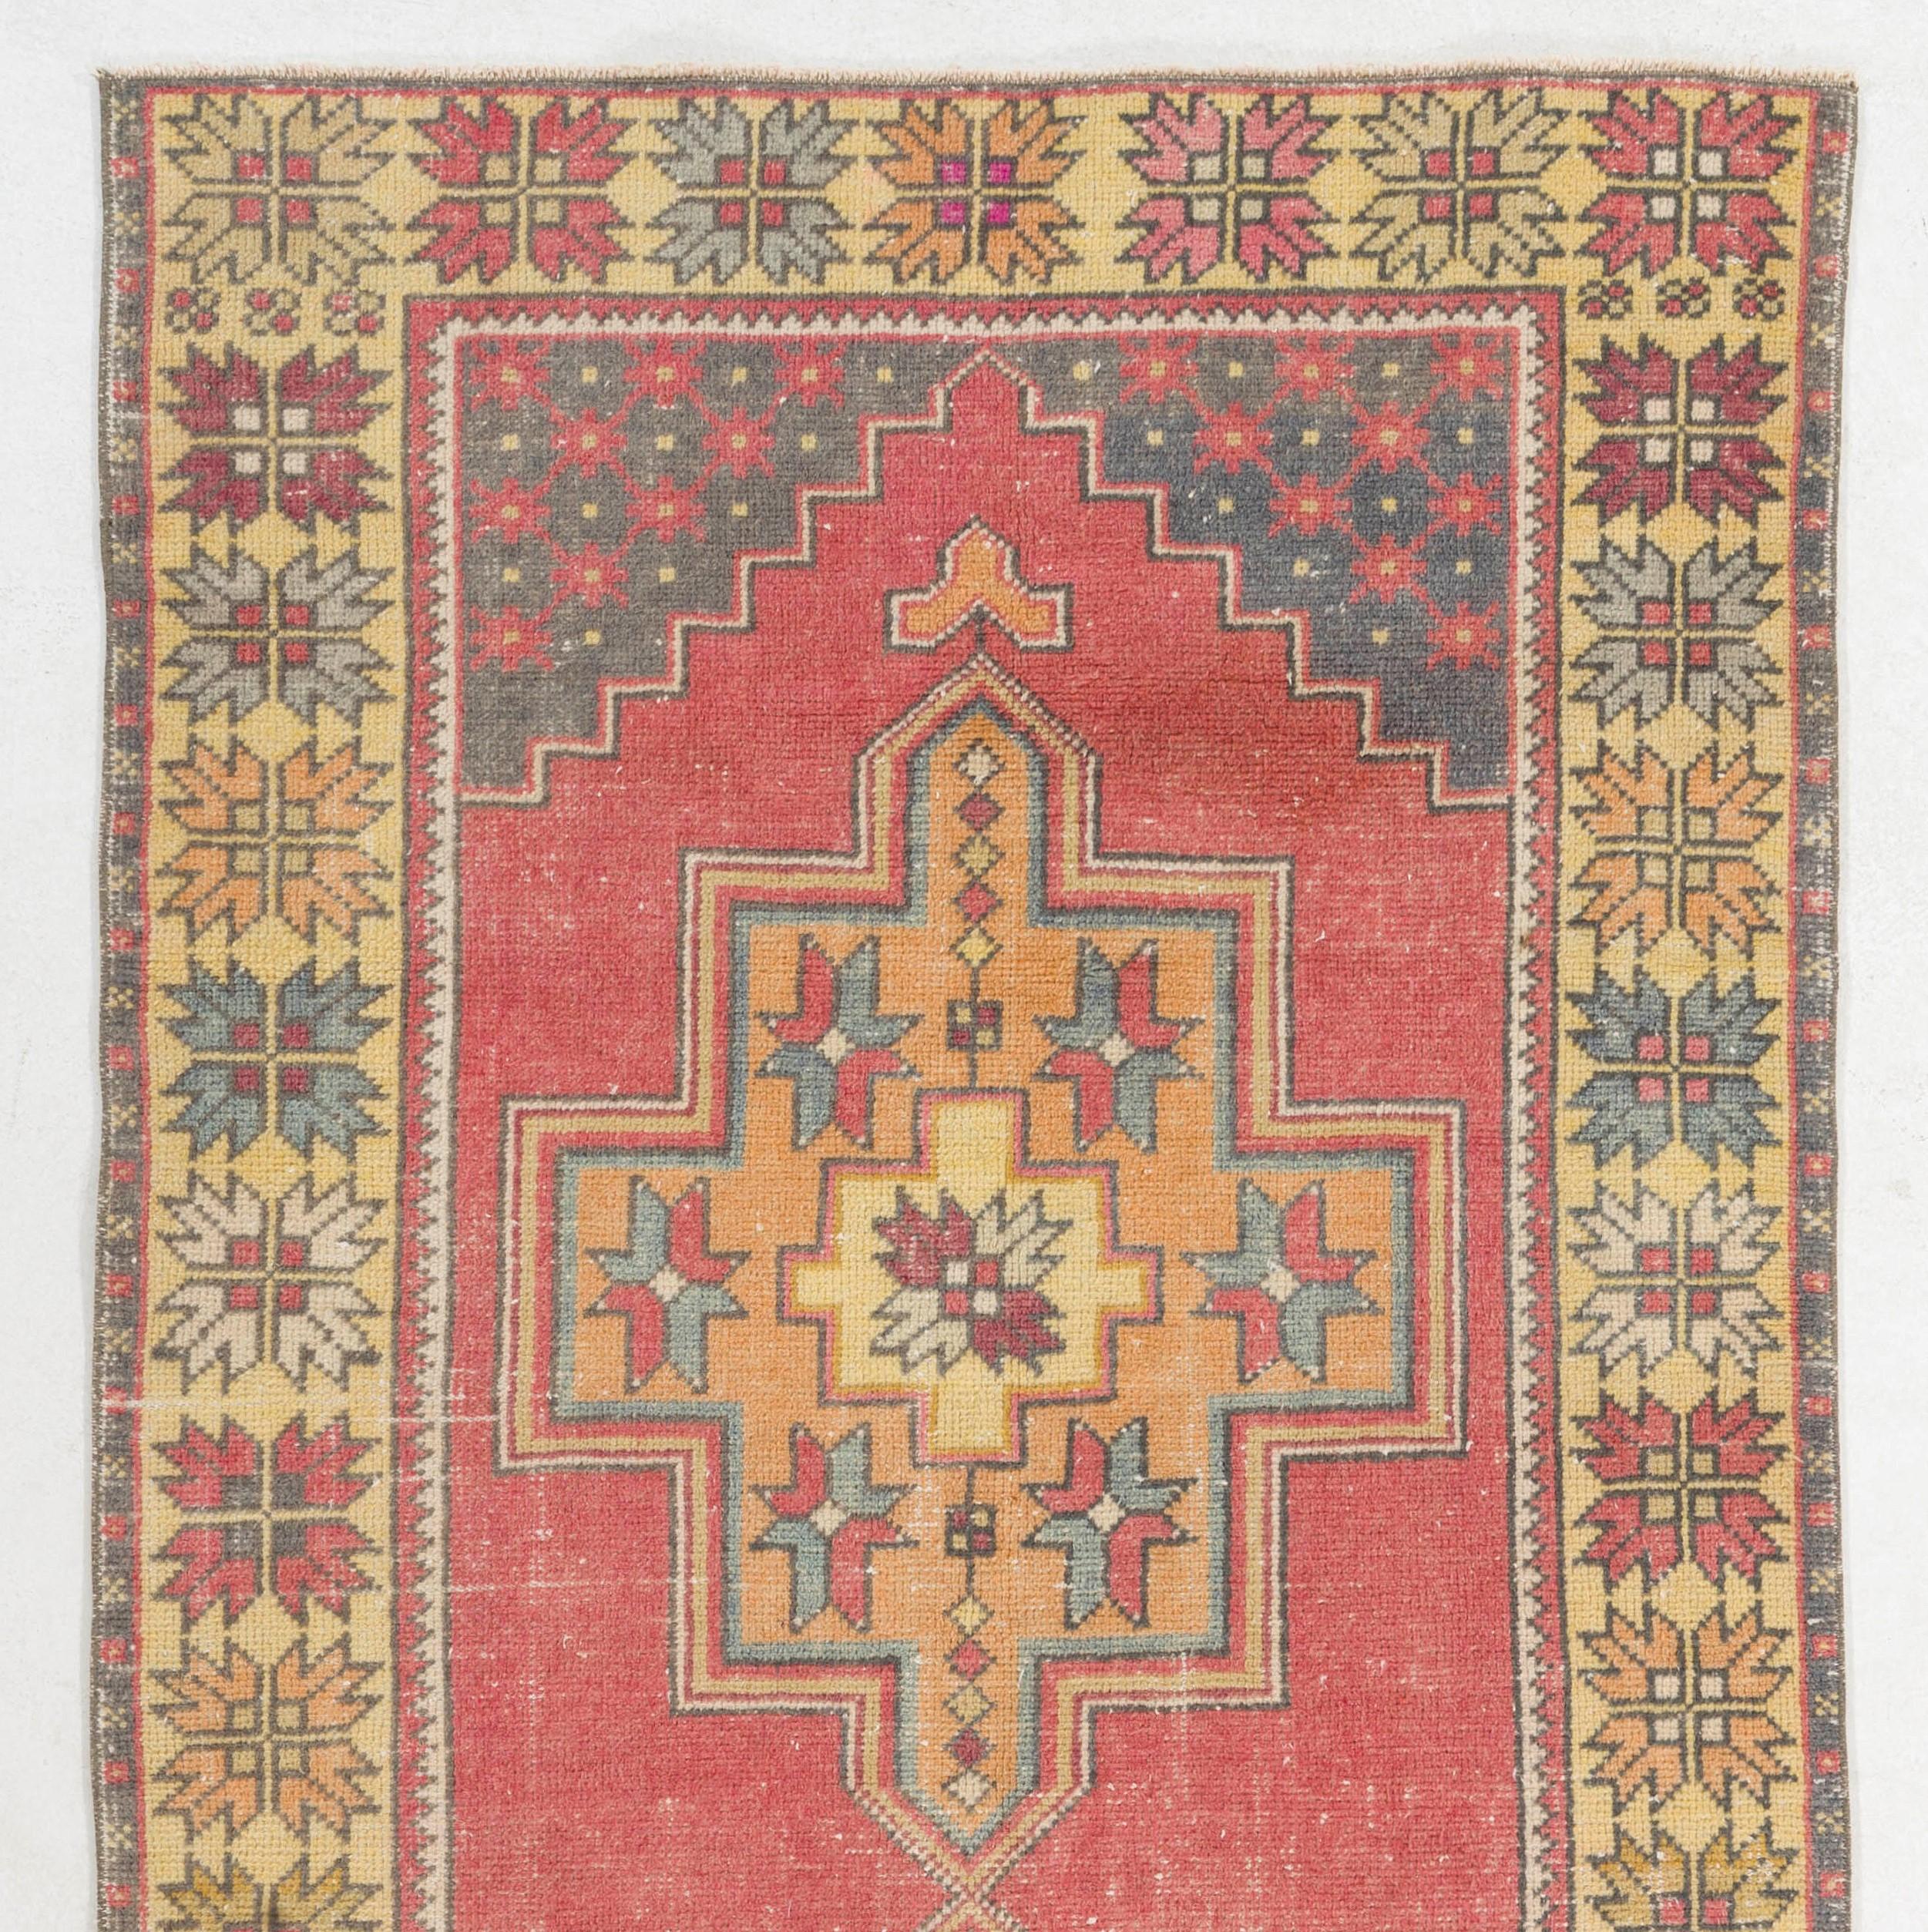 This vintage Central Anatolian rug has two linked geometric medallions at its center in soft, faded orange that are decorated with colorful abstract stars against a rich, dark coral pink. The corner-pieces are in dark indigo and feature a dense